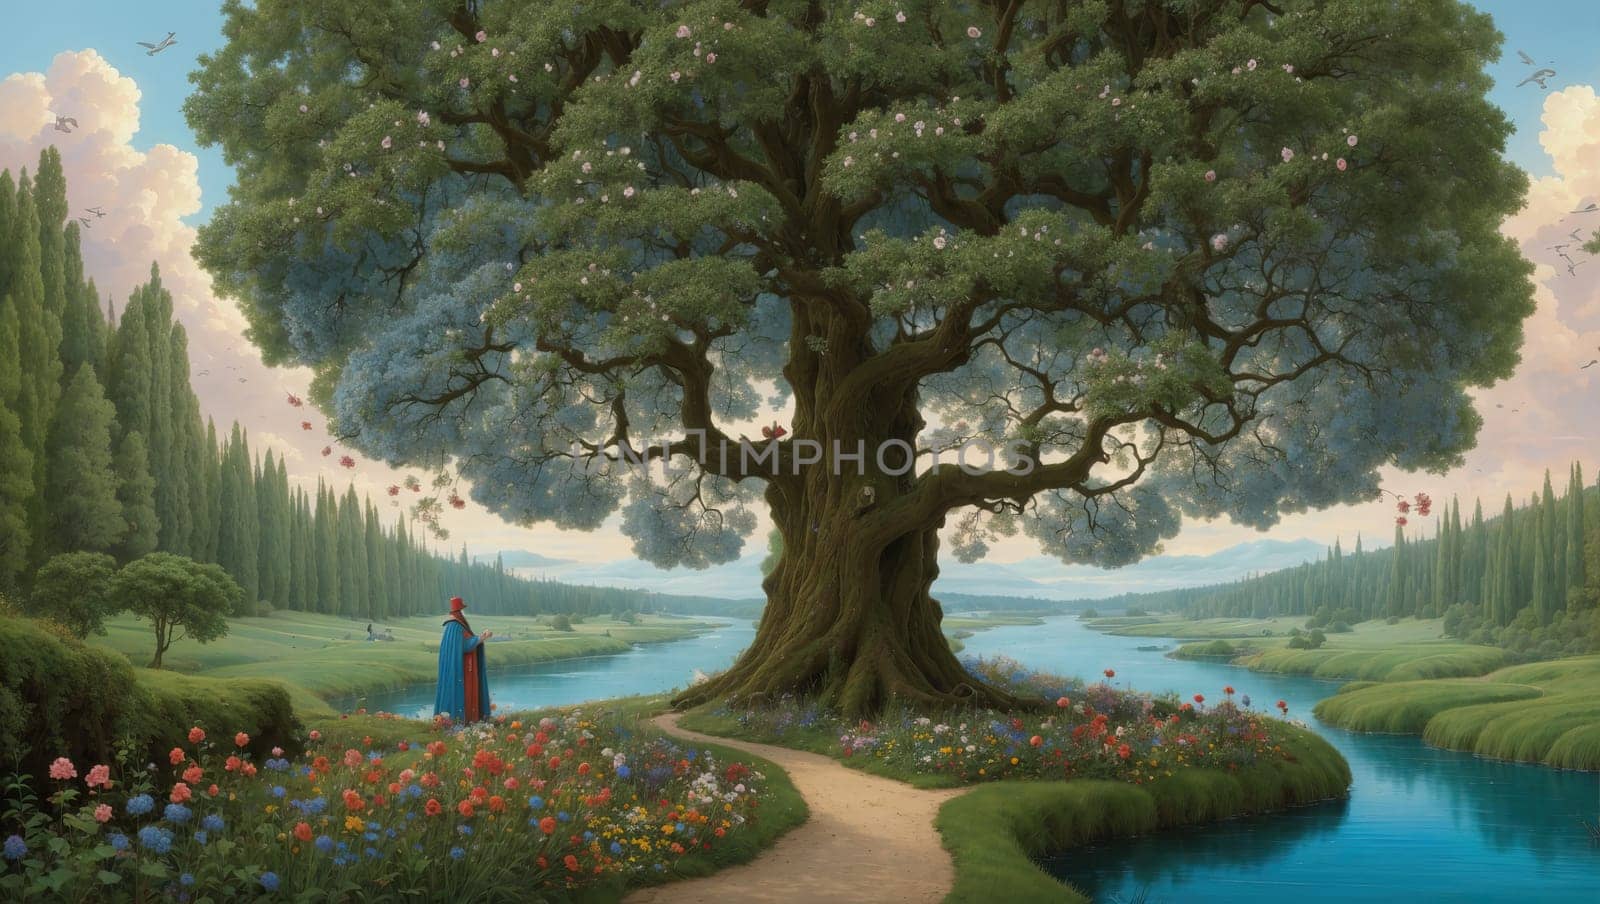 A wizard near an old large tree in a flowering meadow by applesstock